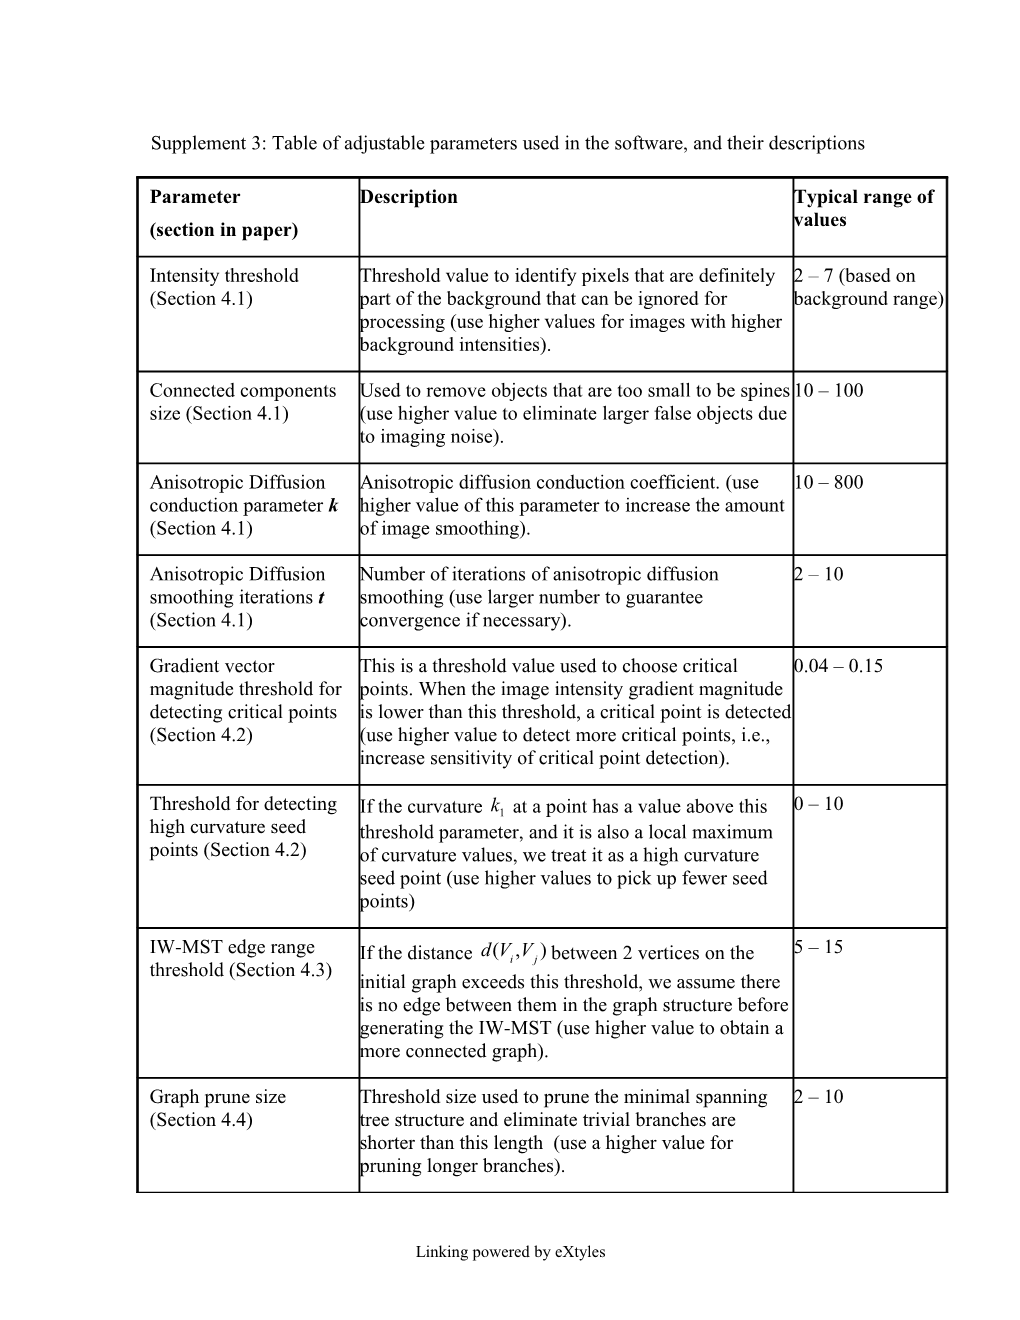 Supplement 3: Table of Adjustable Parameters Used in the Software, and Their Descriptions